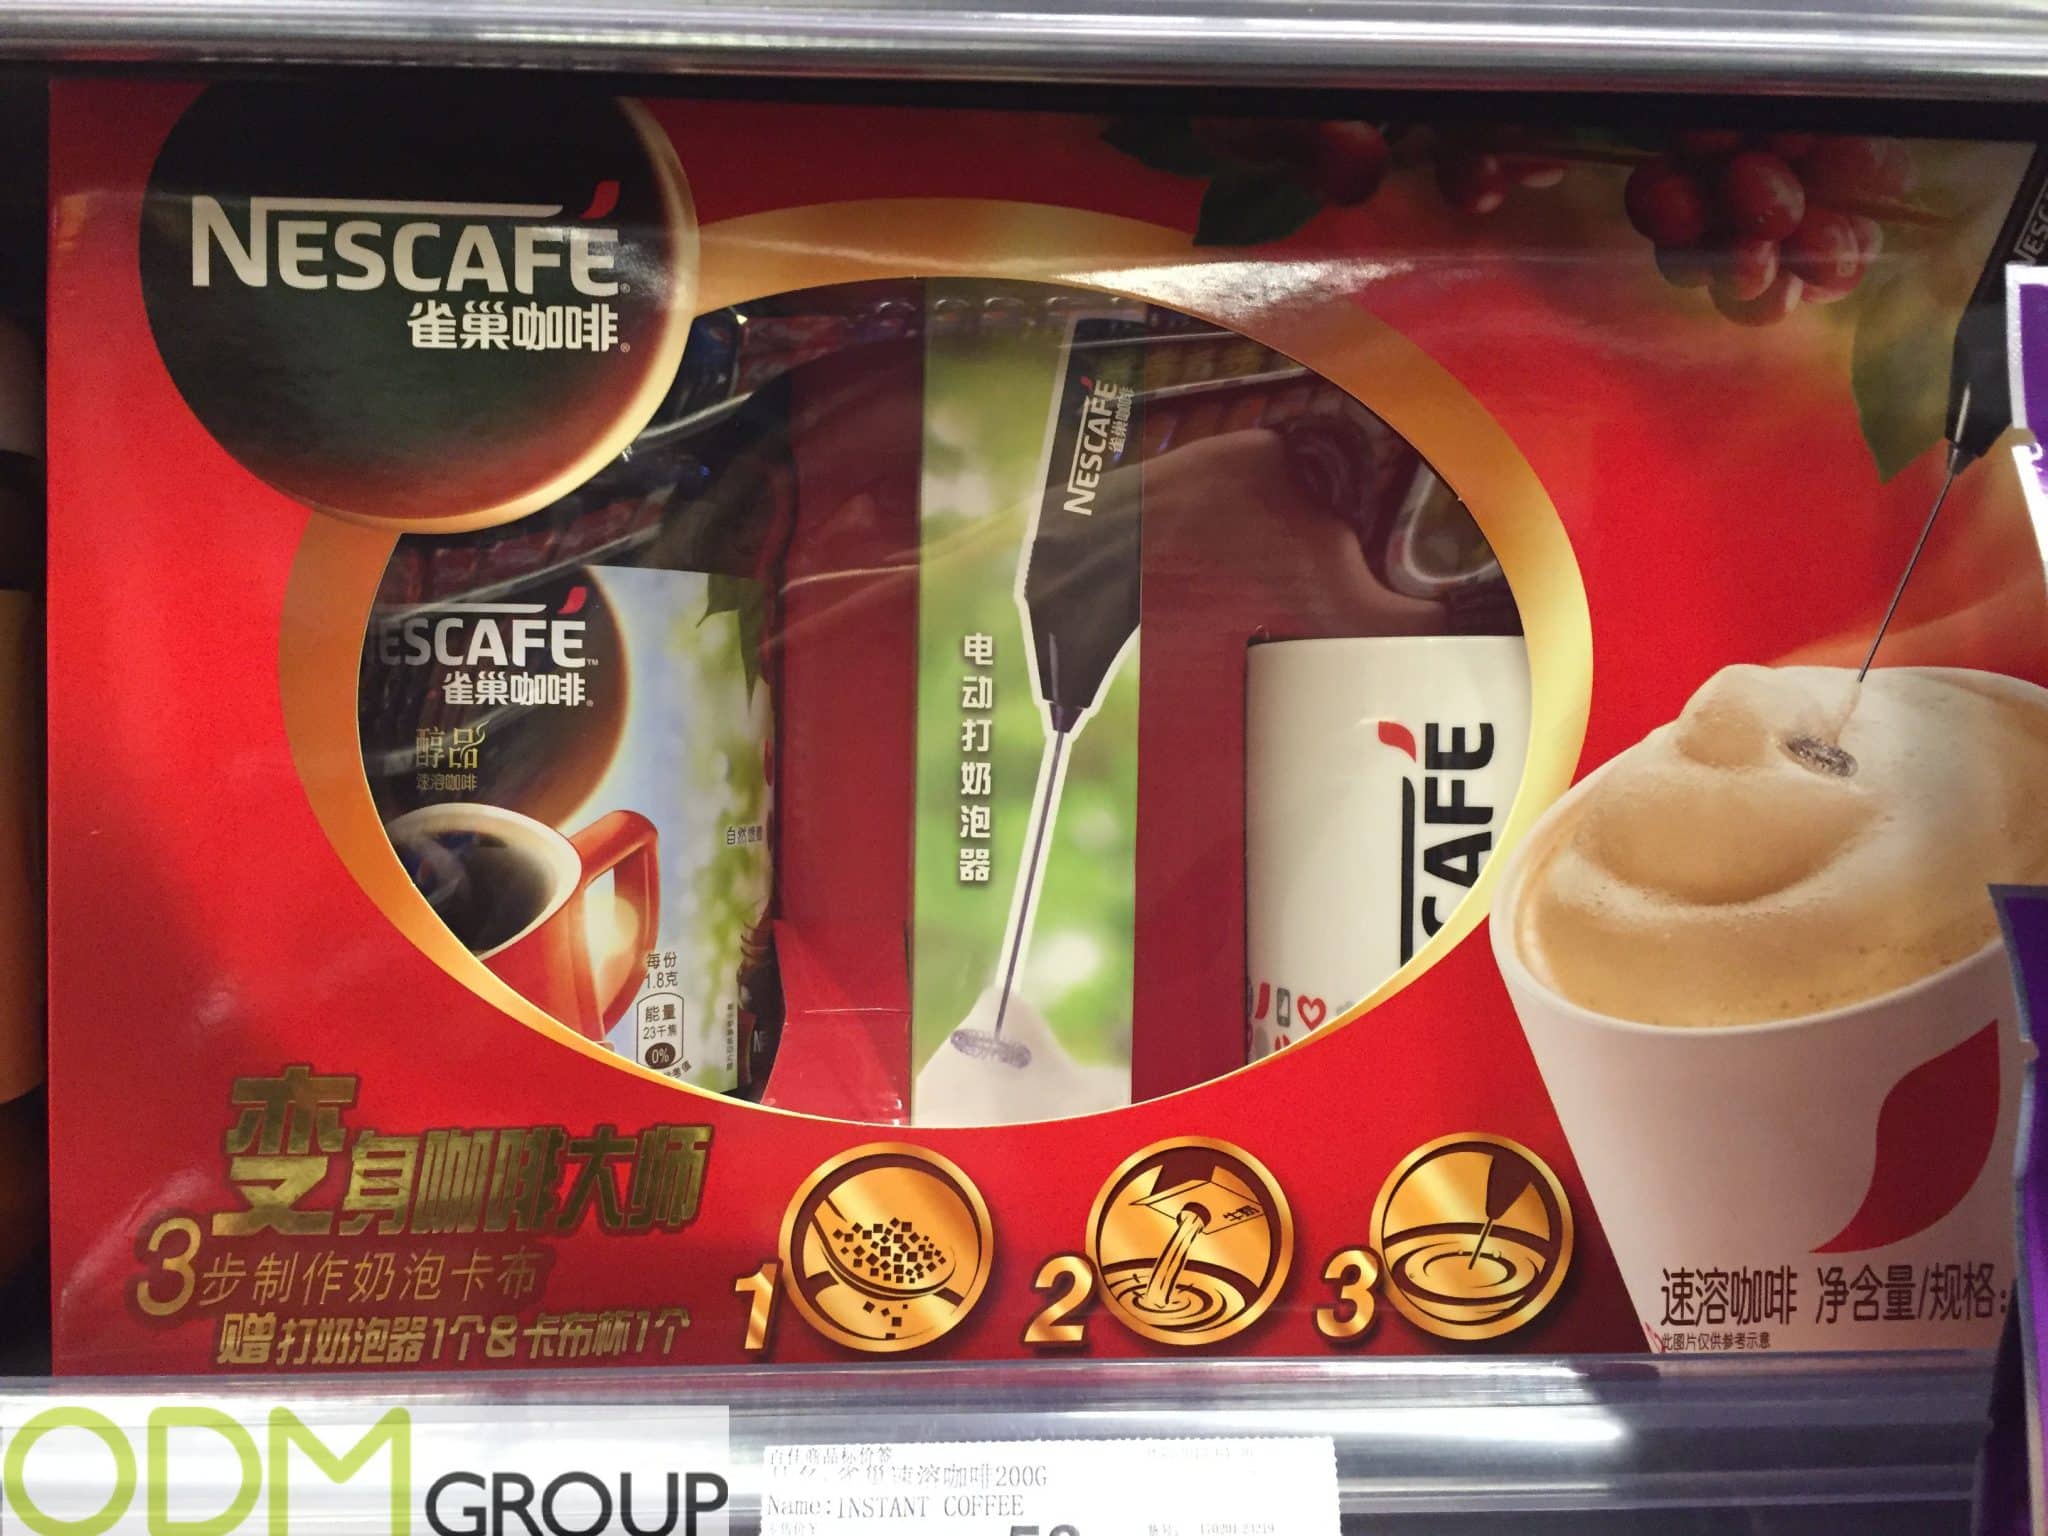 Nescafé On-pack Promotion - Free Milk Frother and Mug